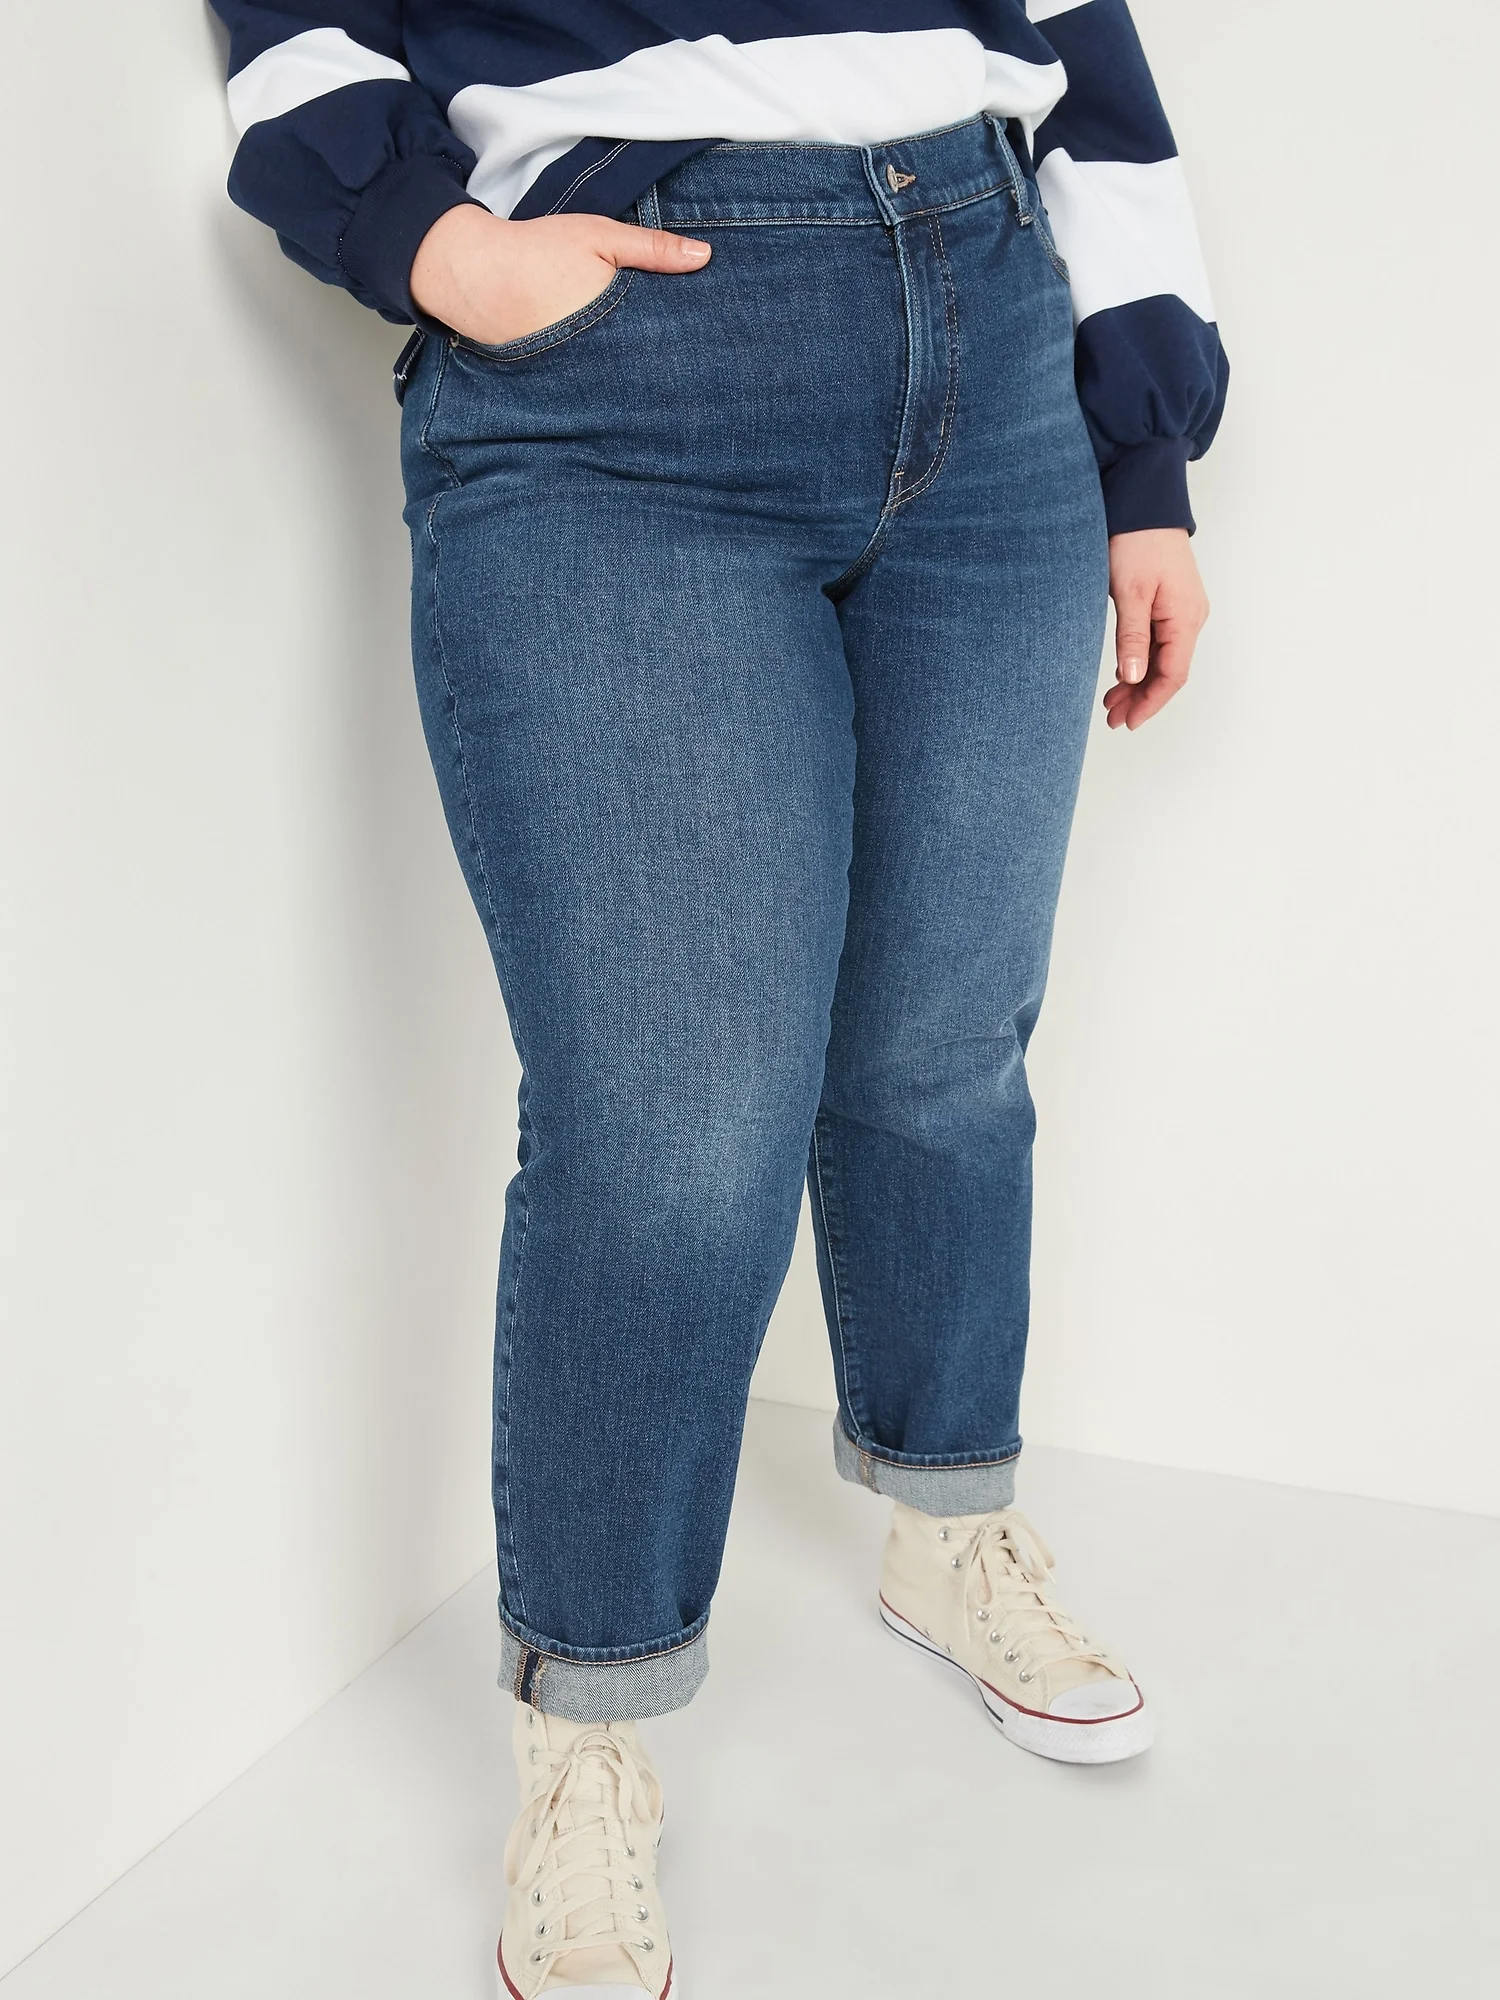 Old Navy + High-Waisted Secret-Slim Pockets O.G. Straight Plus-Size Jeans